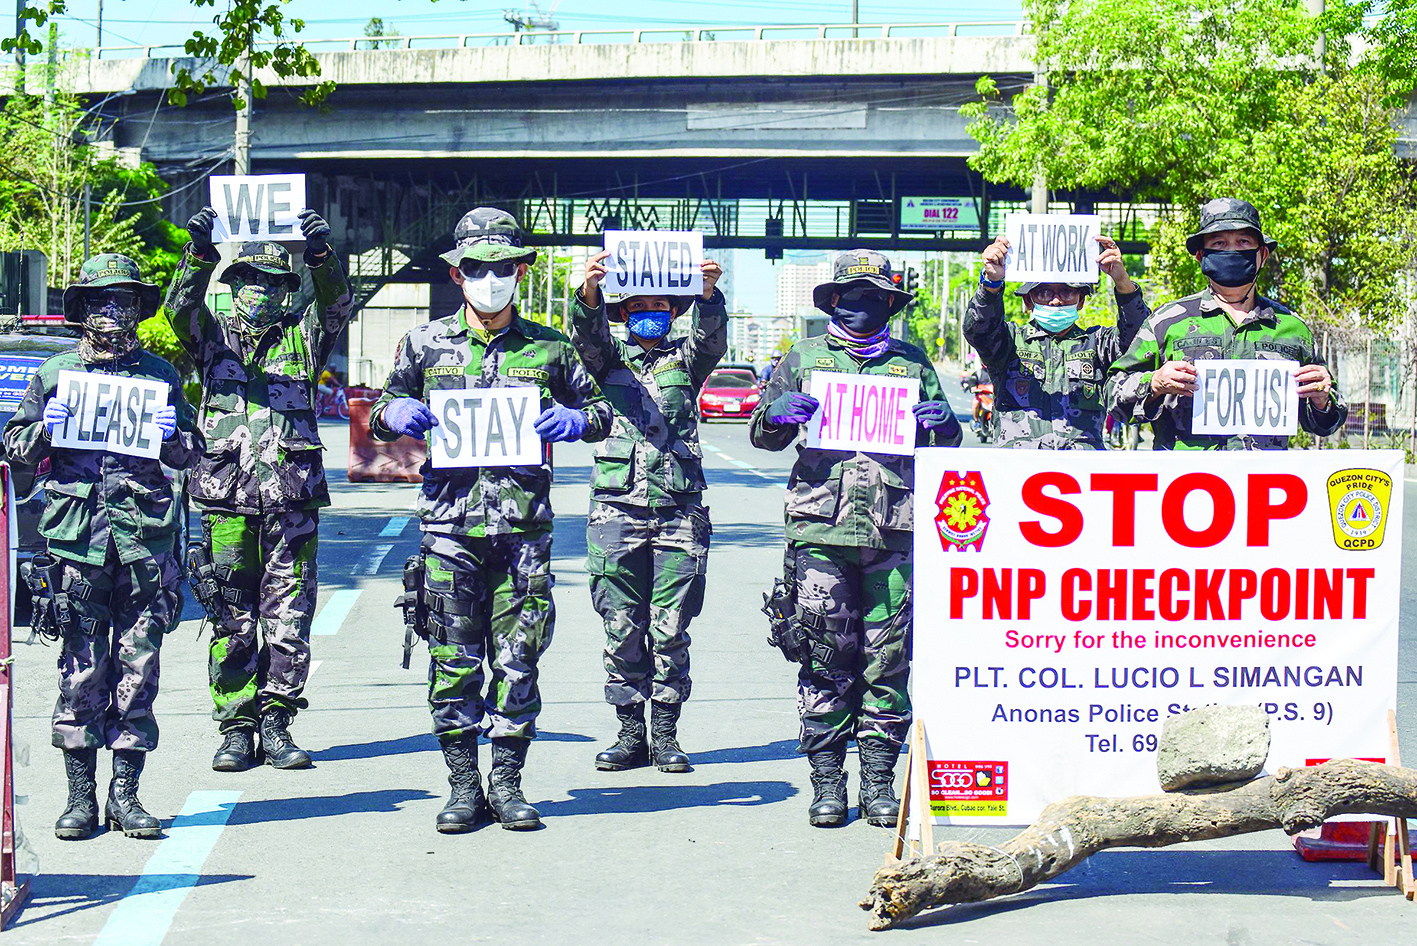 Police personnel hold up placards reminding people to stay at home amid concerns of the spread of the COVID-19 coronavirus in Manila on March 31, 2020. - The main Philippine island of Luzon, home to 55 million people which includes the capital Manila, is in the second week of a lockdown to contain the spread of the disease. (Photo by Maria TAN / AFP)